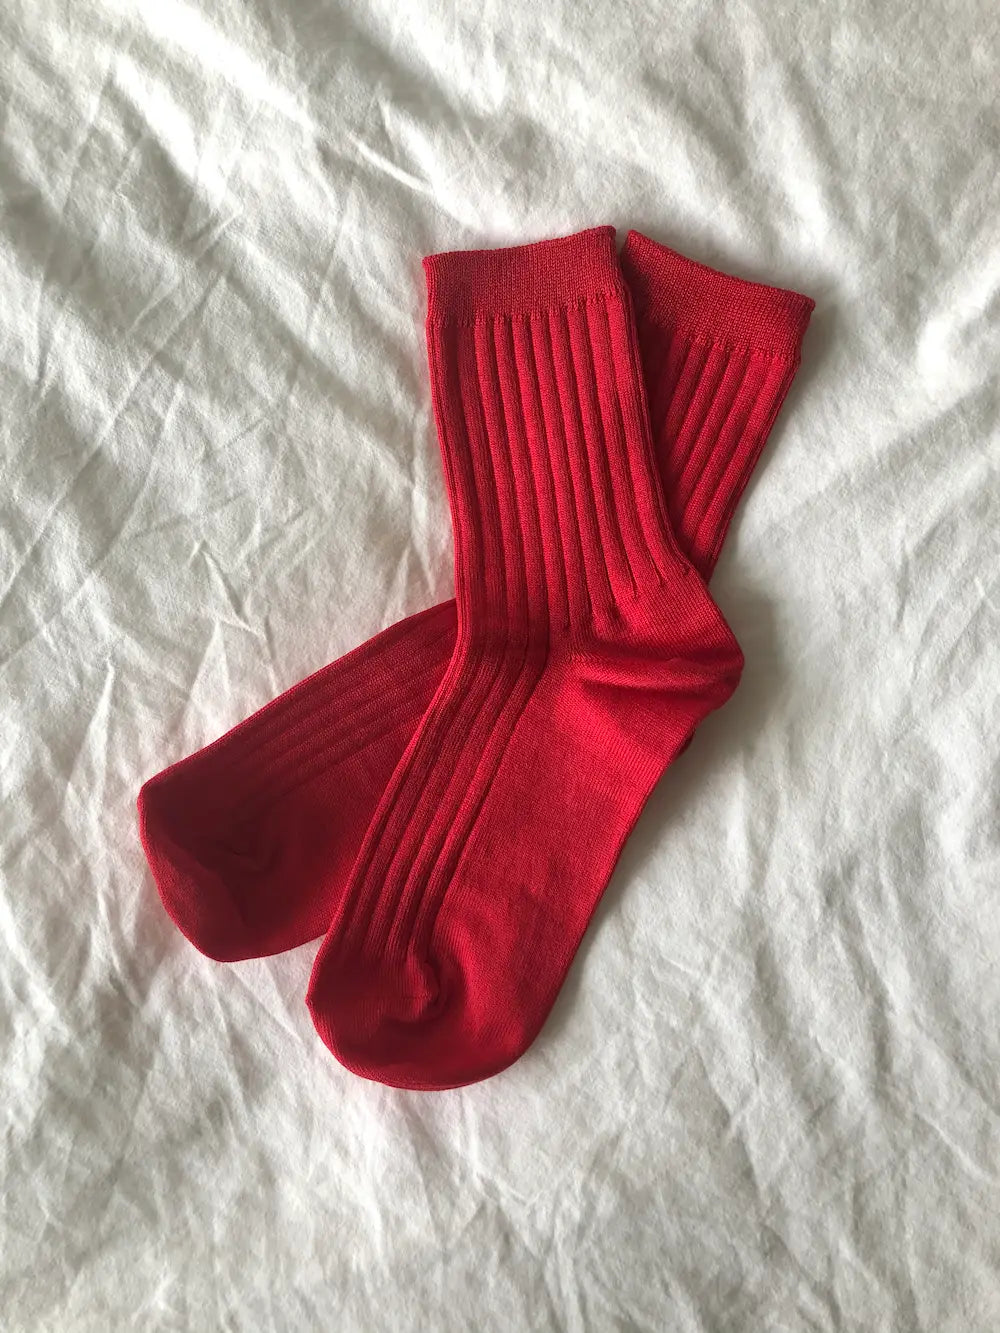 Her Socks - Mercerized Combed Cotton Rib - CLASSIC RED